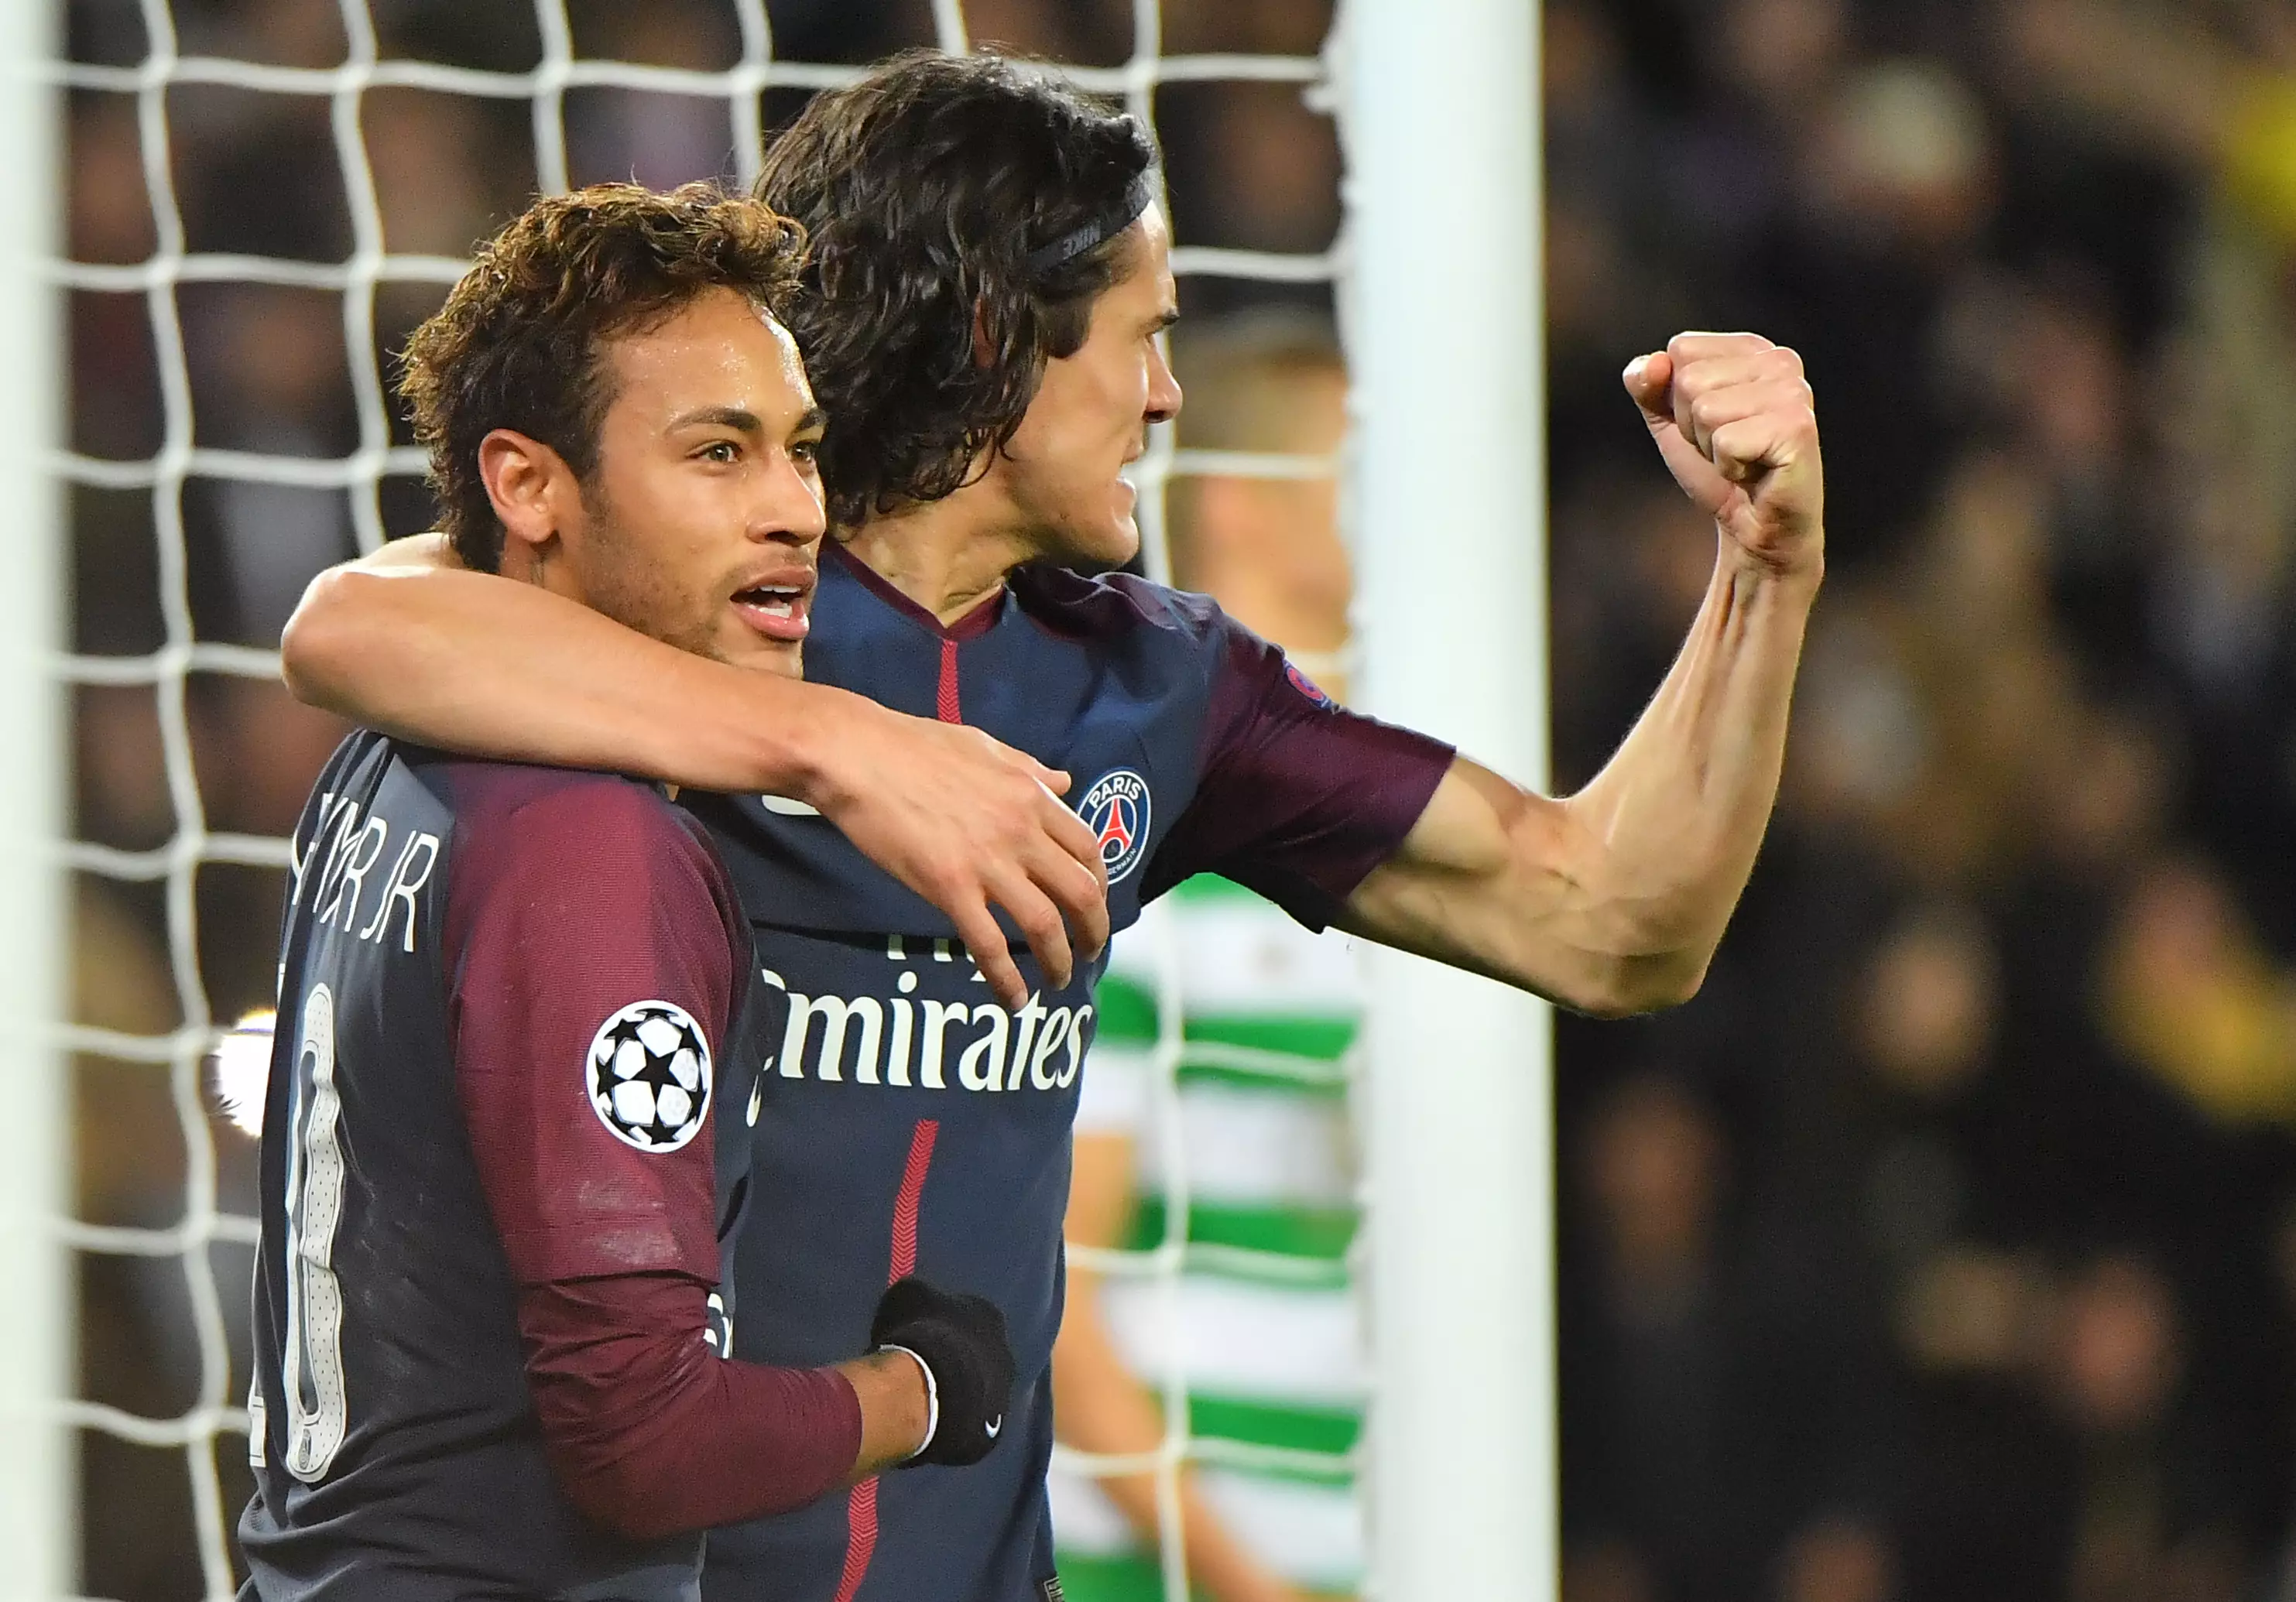 Neymar and Cavani celebrate scoring a goal in the Champions League. Image: PA